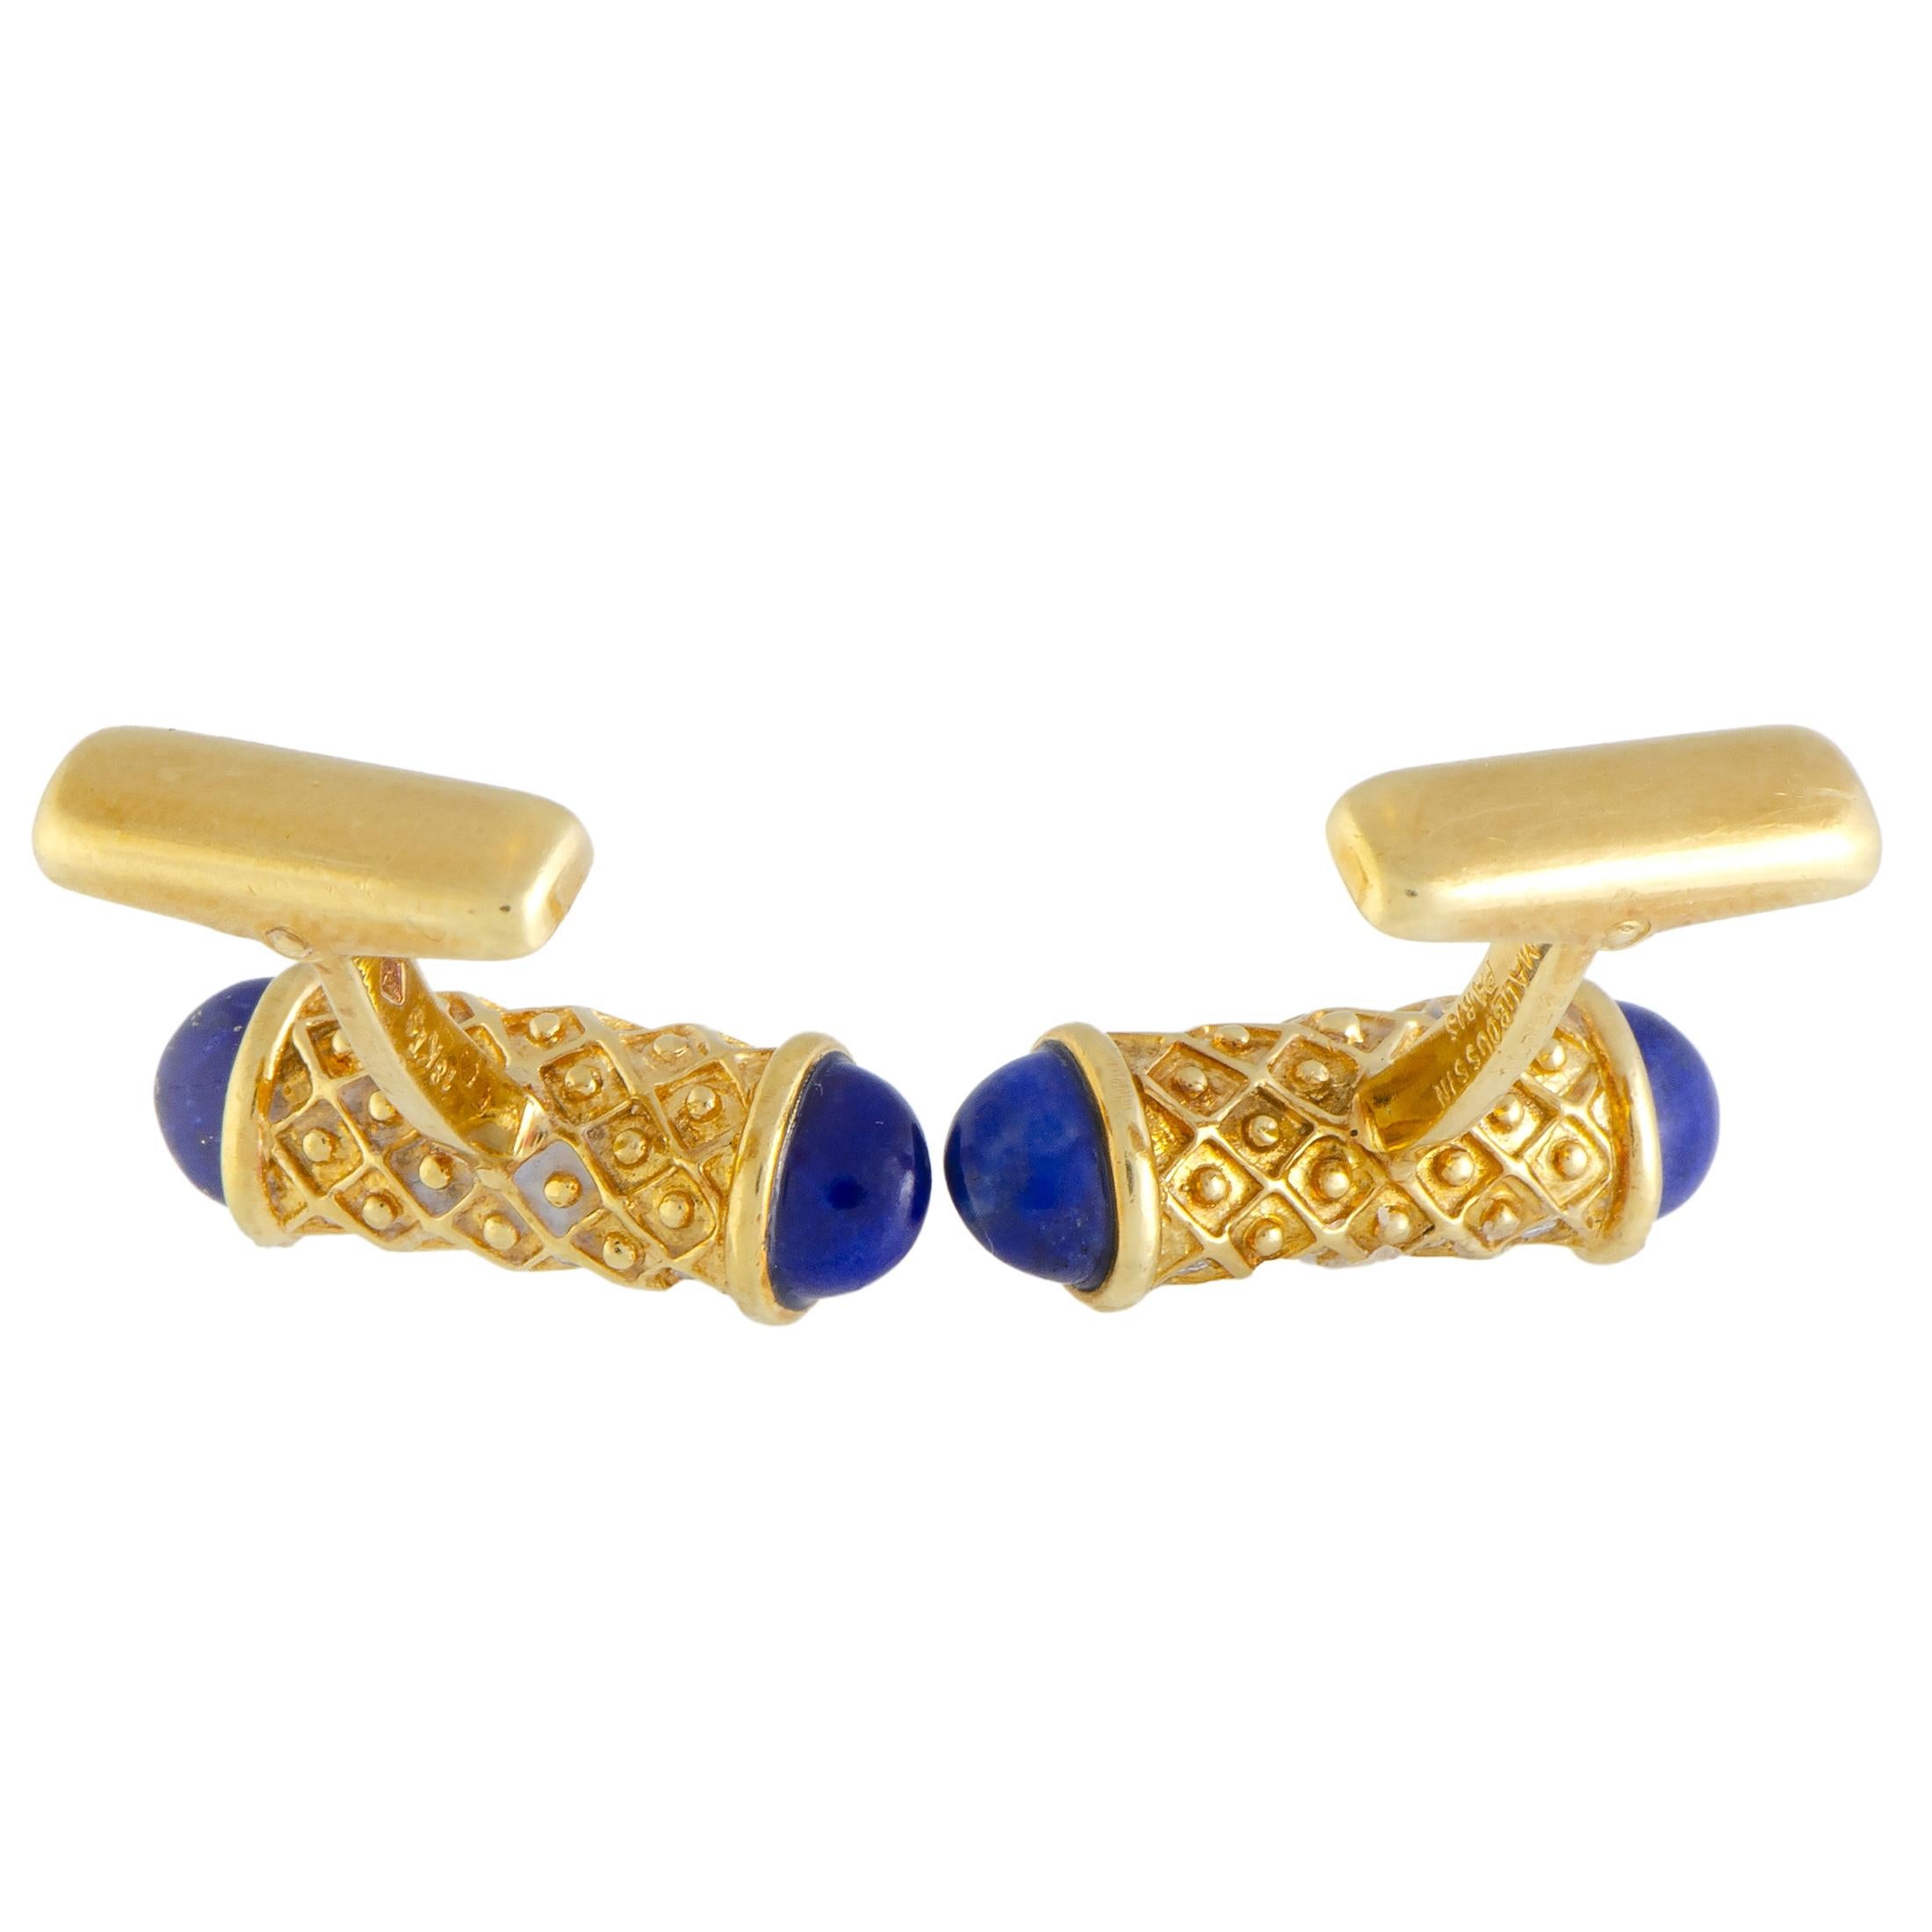 Featuring a remarkably elegant design, this charming pair of cufflinks by Mauboussin offers an alluringly classy appearance. The attractive pair is made of shimmering 18K yellow gold and set with the gorgeous lapis lazuli and 0.60ct of sparkling